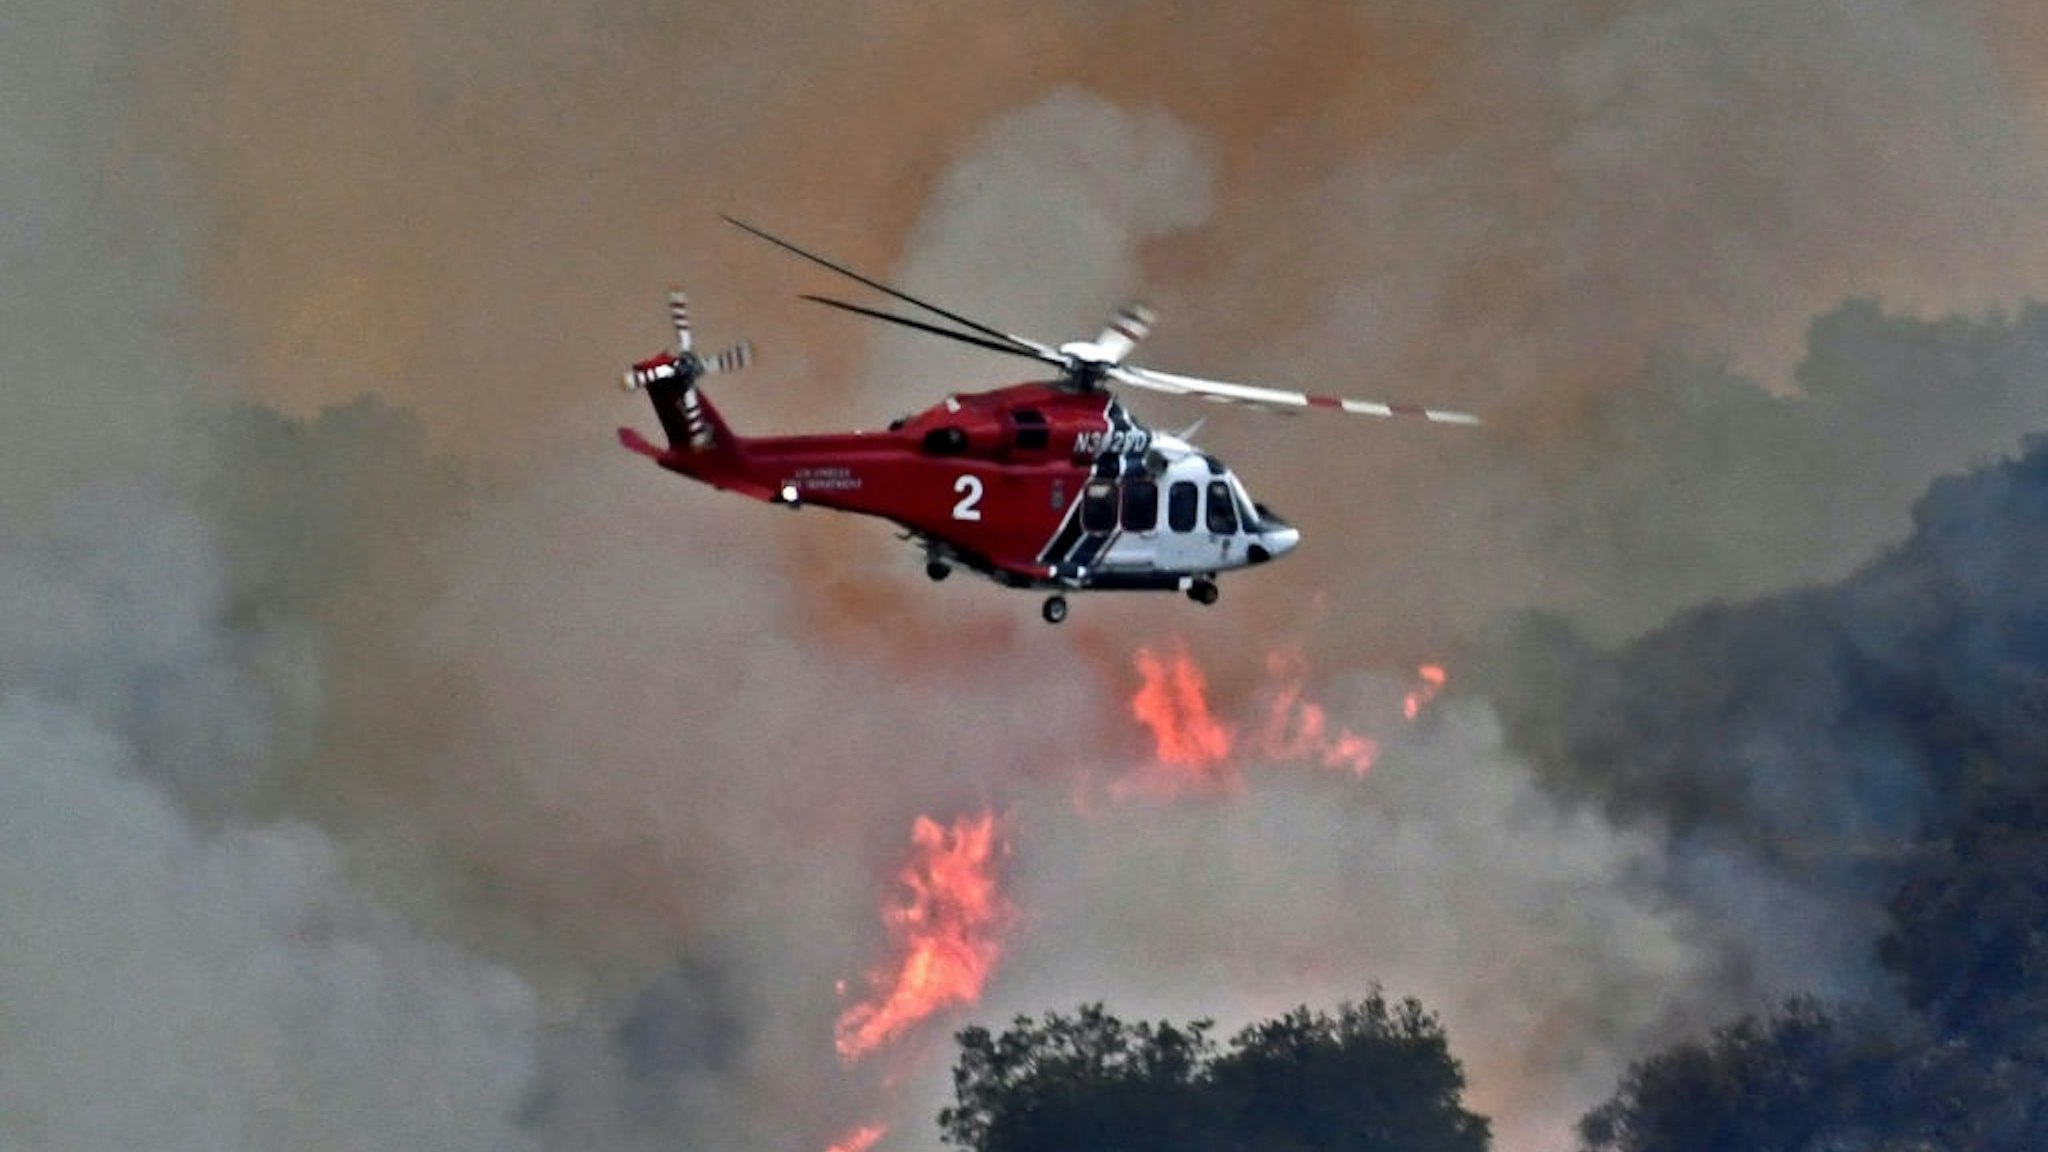 PACIFIC PALISADES, CA - MAY 16: A helicopter flies over as firefighters continue to battle a 1,325-acre brush fire May 16, 2021 near Pacific Palisades, California.